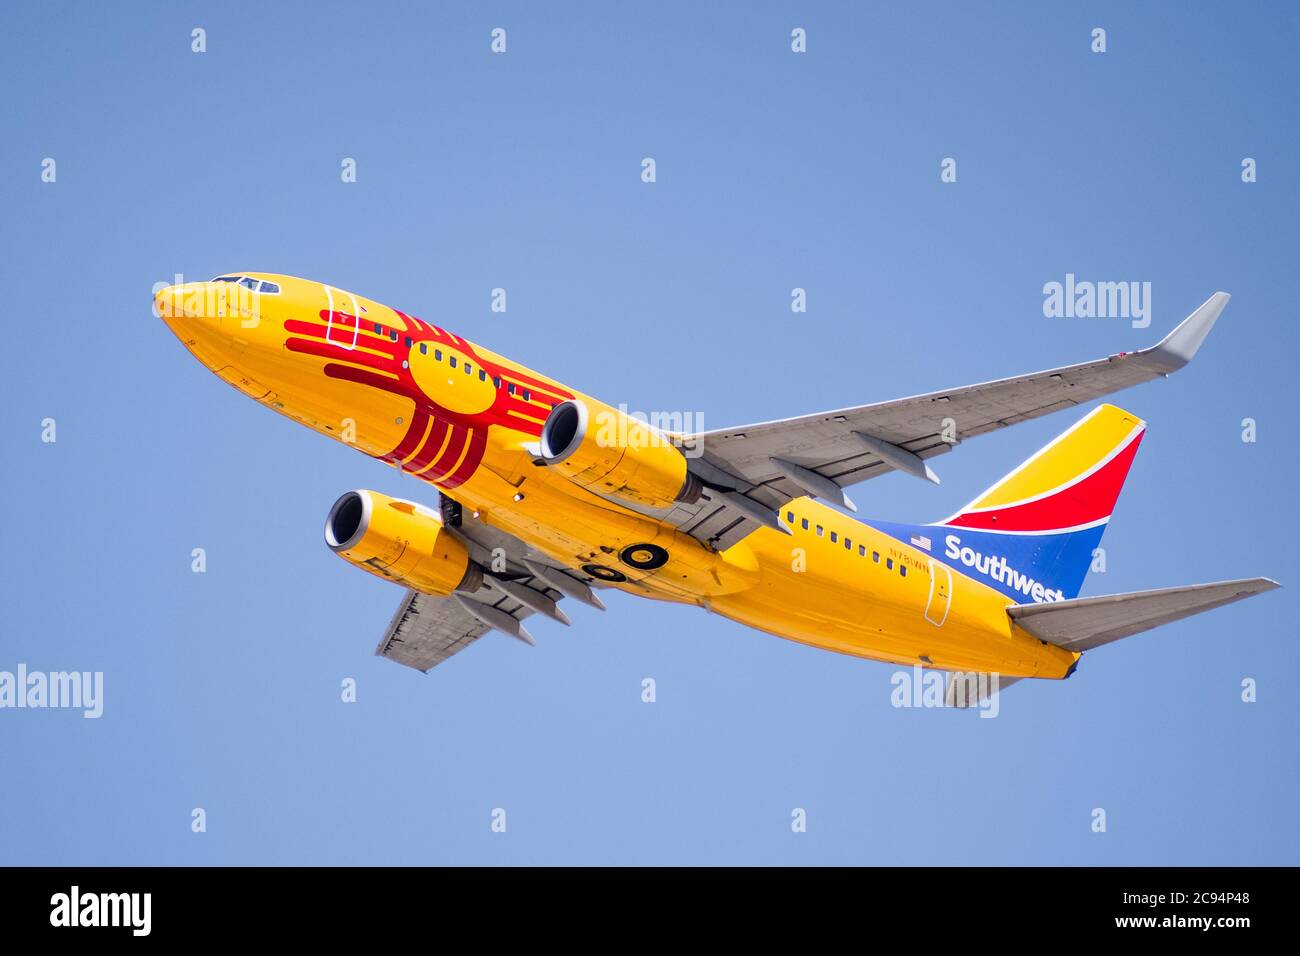 July 23, 2020 San Jose / CA / USA - New Mexico One Southwest Airlines taking off from San Jose International Airport (SJC); New Mexico One is honoring Stock Photo